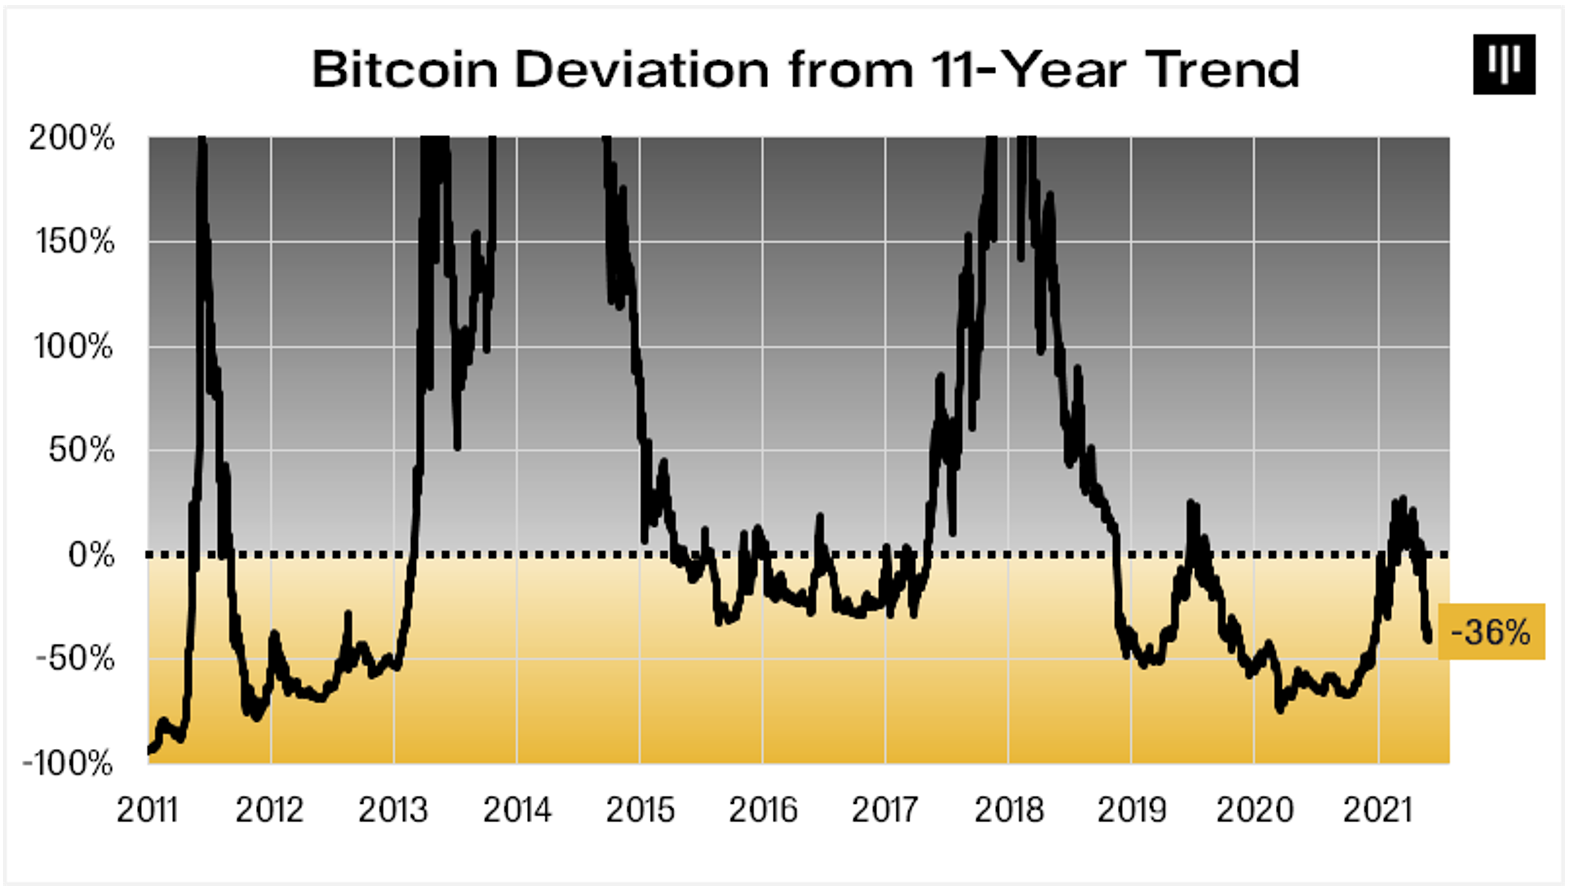 BTC (BTC) Most Undervalued in 10 Years According to Stock-to-Flow Model